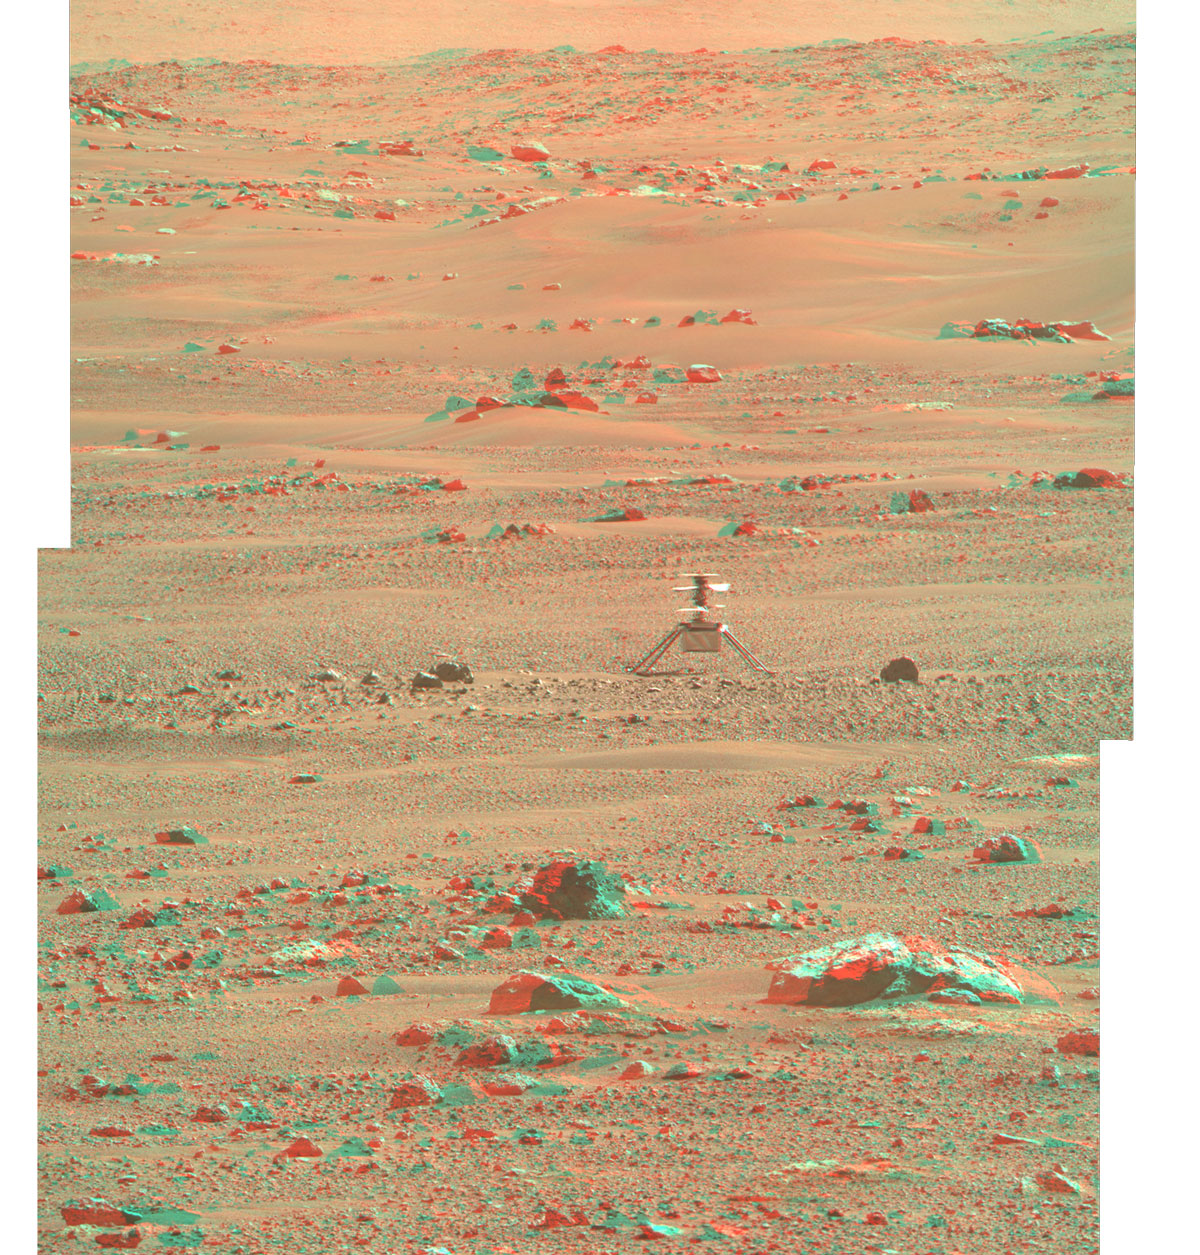 NASA's Ingenuity Mars Helicopter is seen here in 3D using images taken June 6, 2021, by the left and right Mastcam-Z cameras aboard NASA’s Perseverance Mars rover.